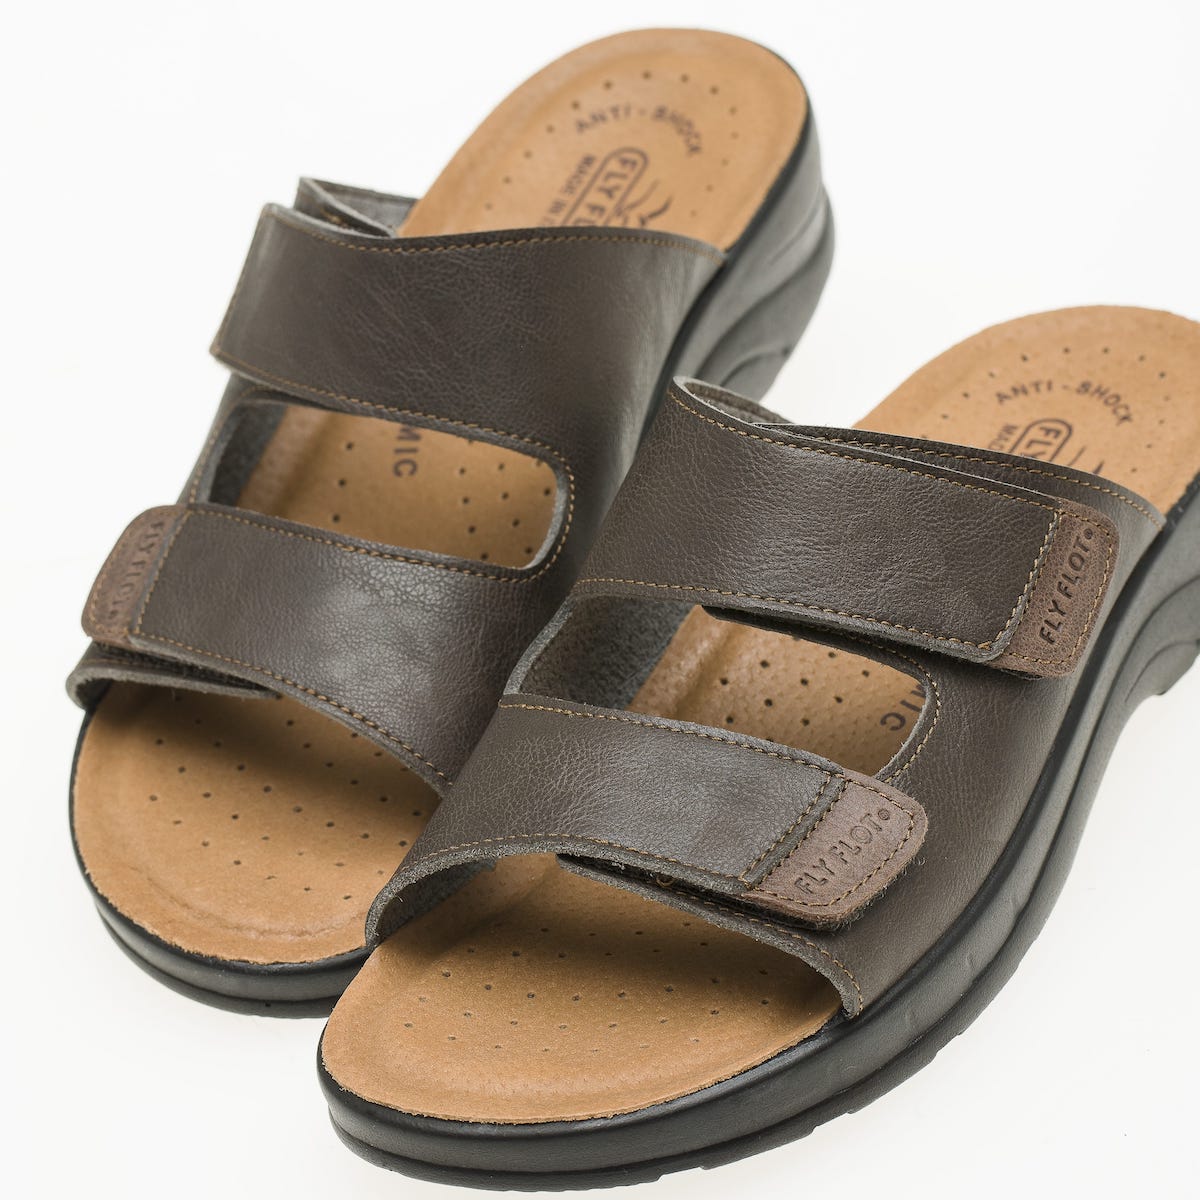 Synthetic Man Slipper Brown (S5024UB)